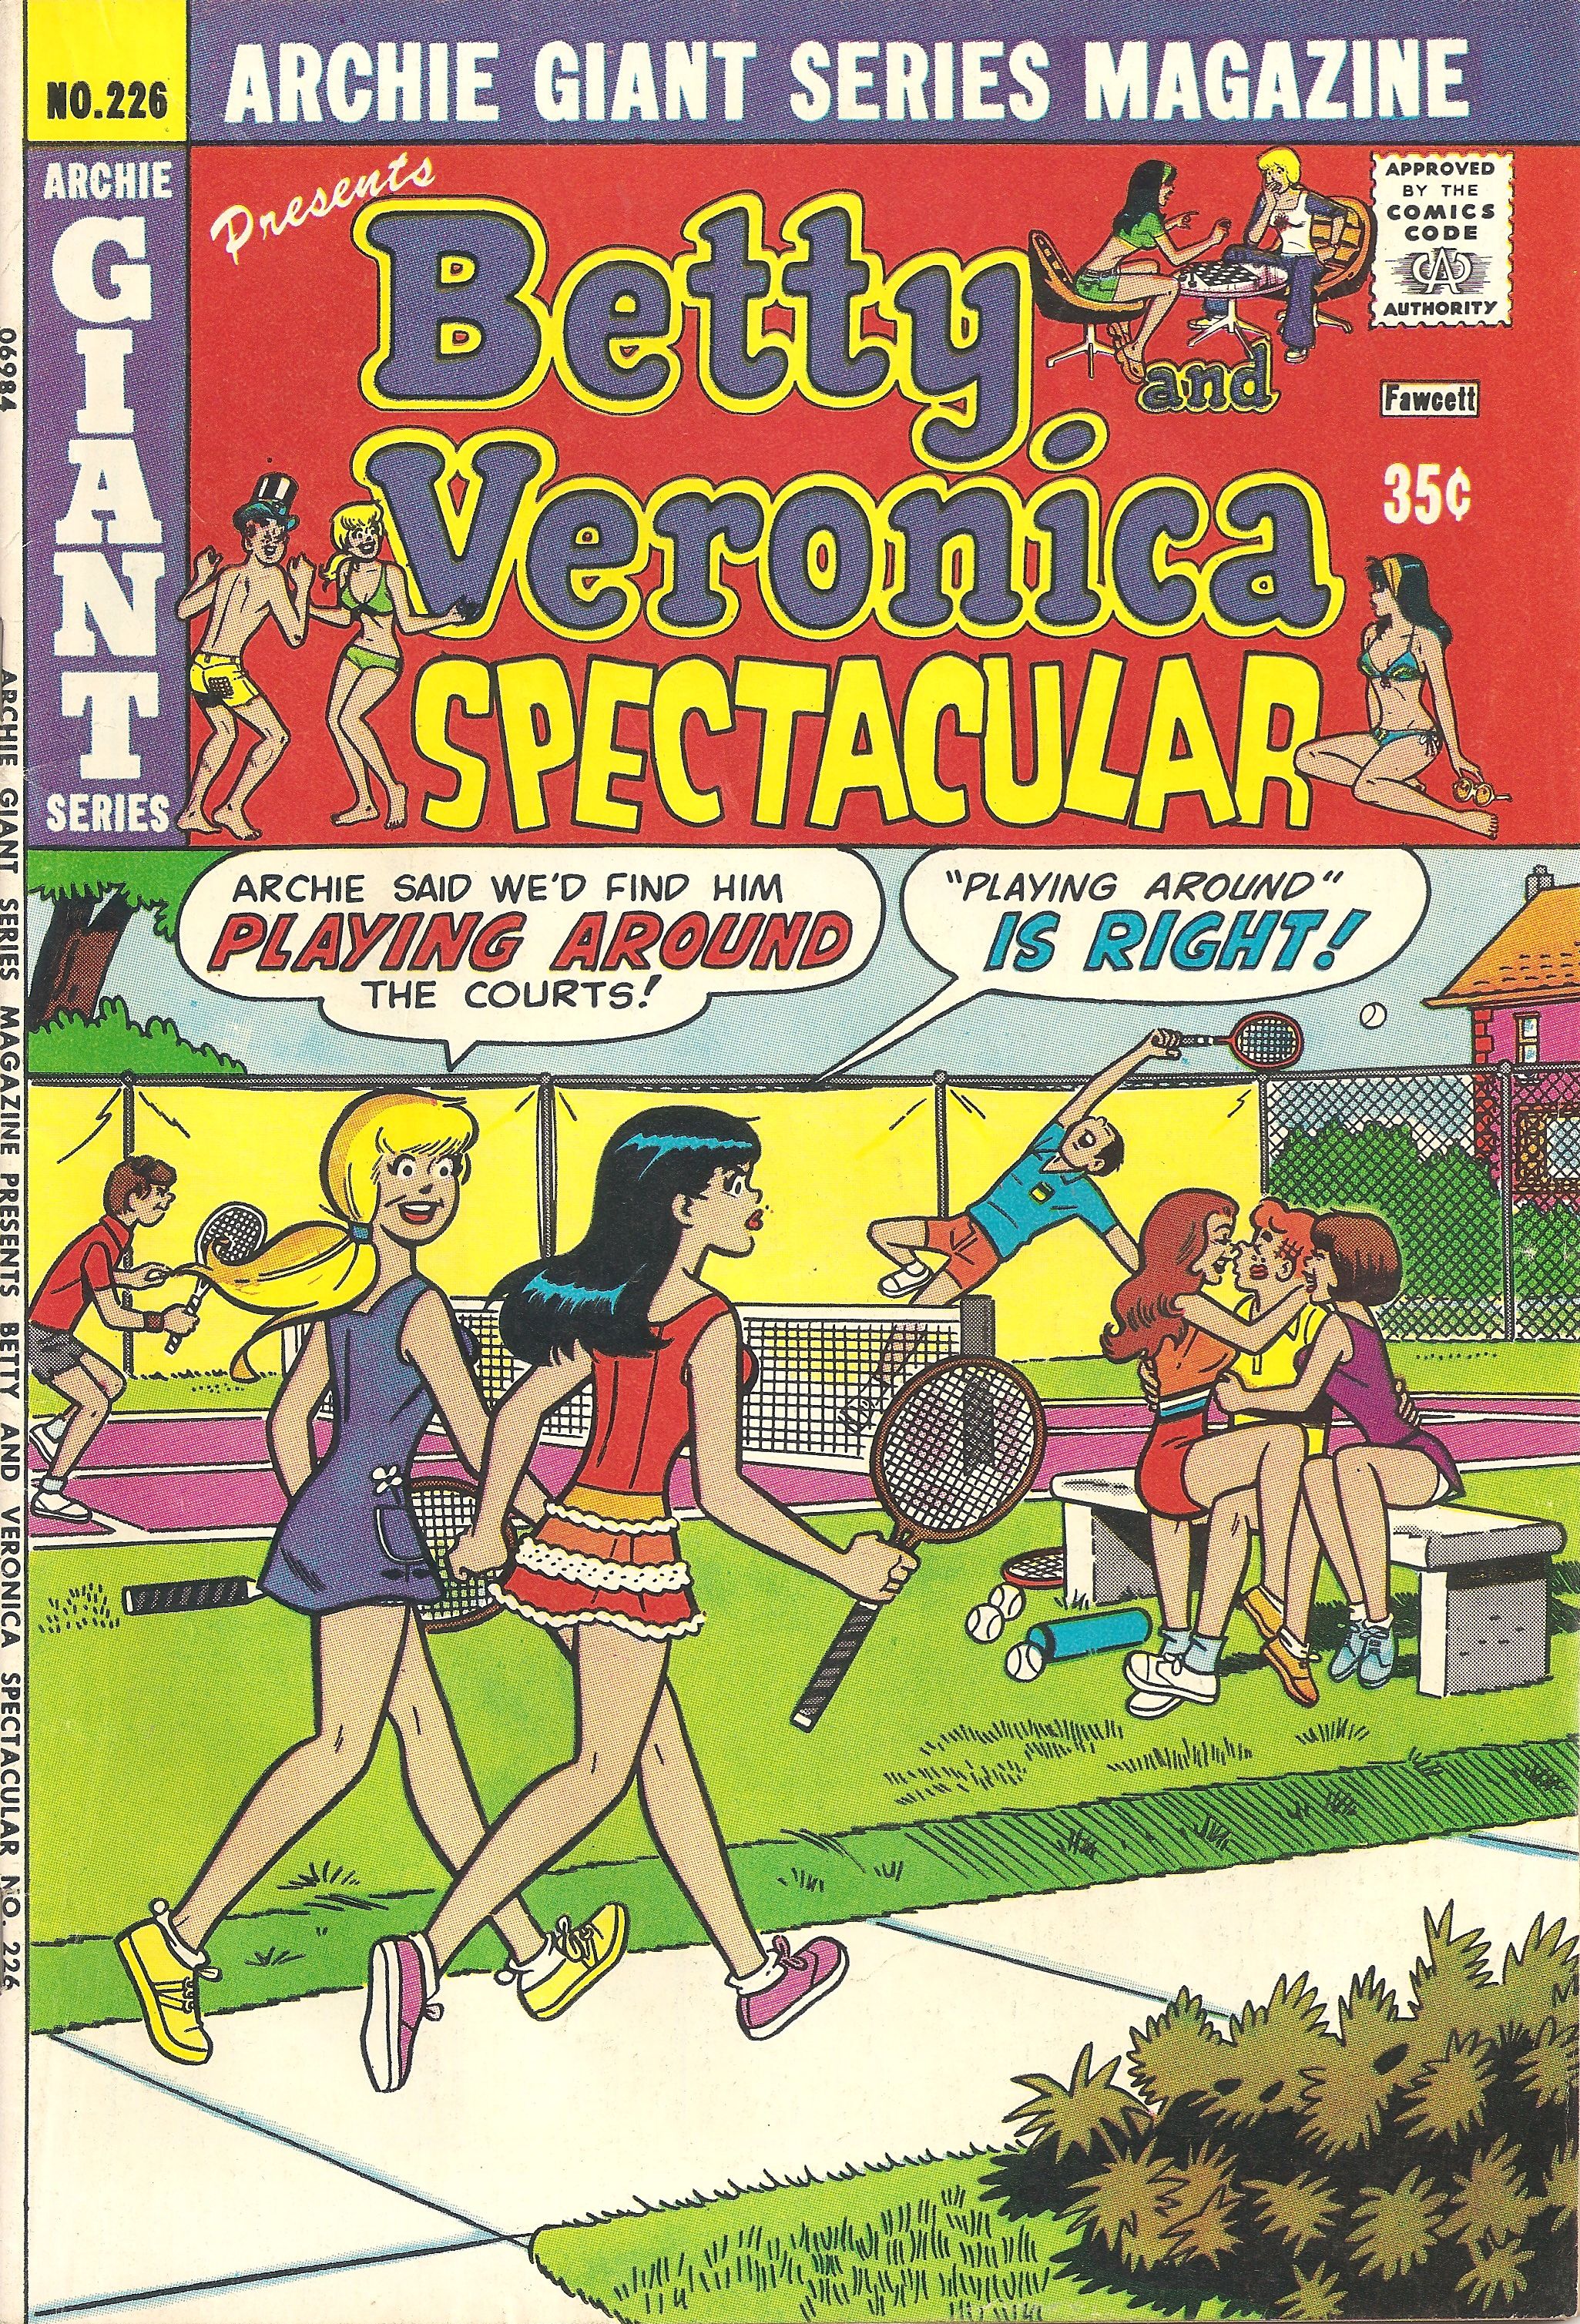 Read online Archie Giant Series Magazine comic -  Issue #226 - 1